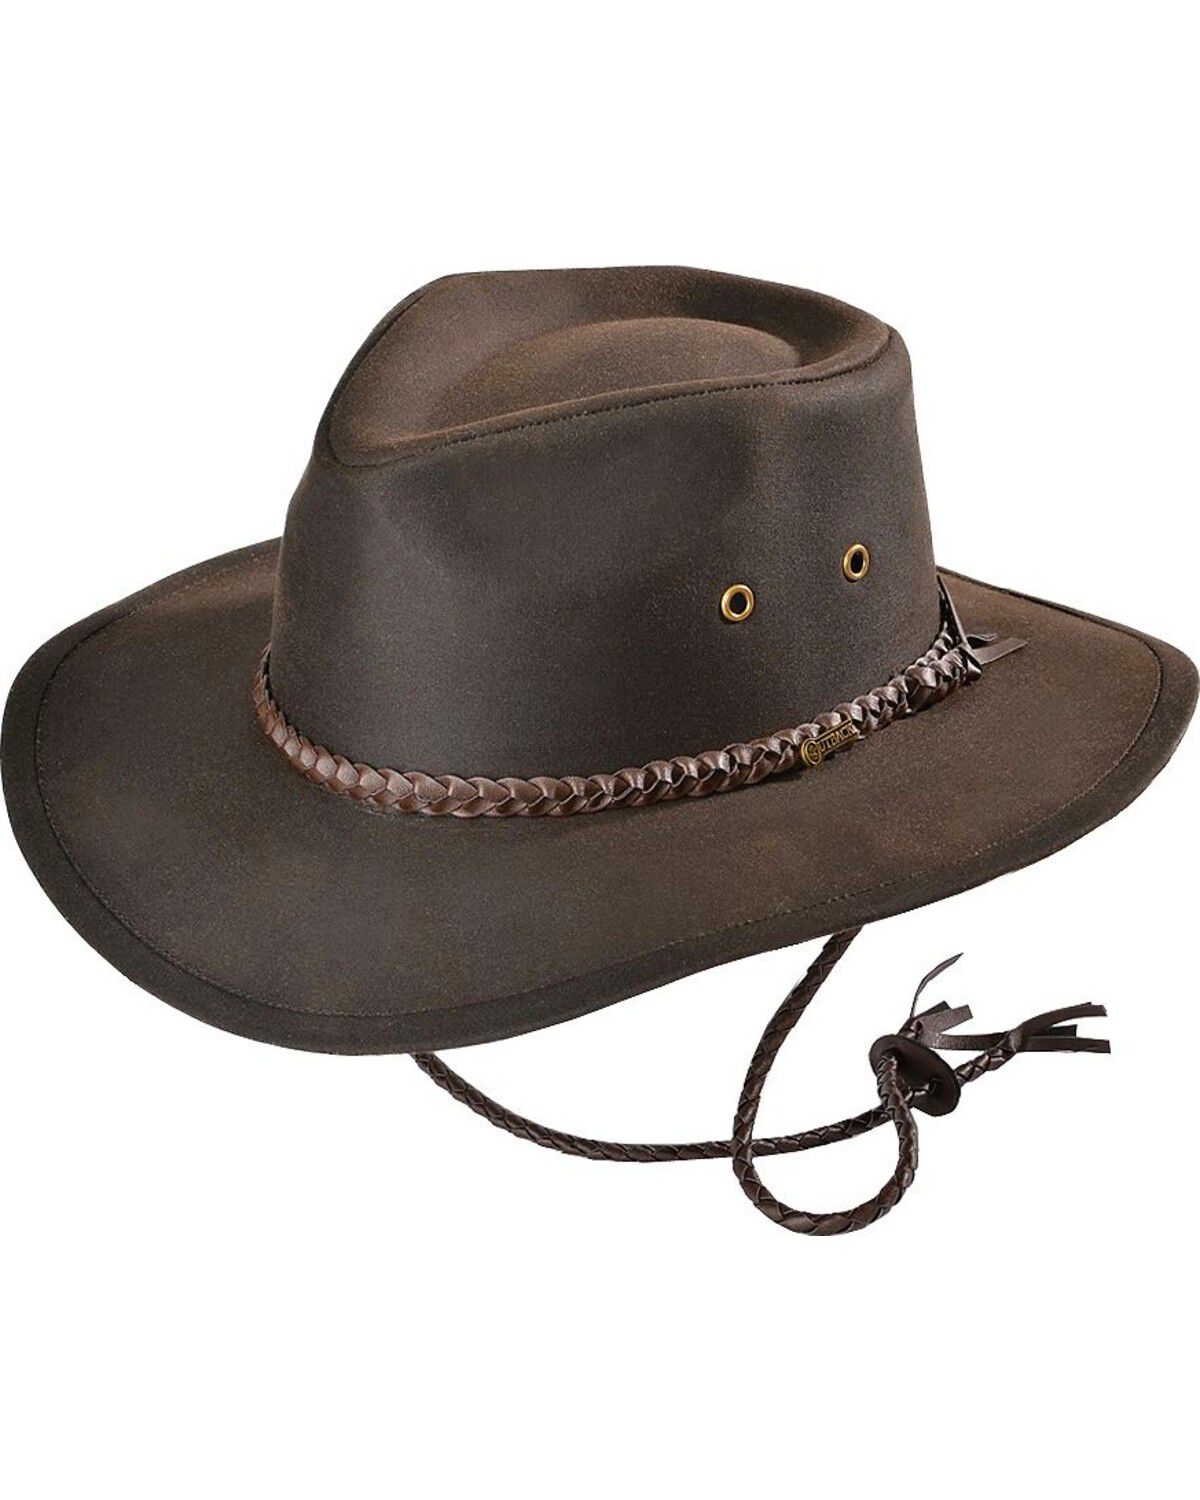 Ascot Cap Outback Trading Co Brown